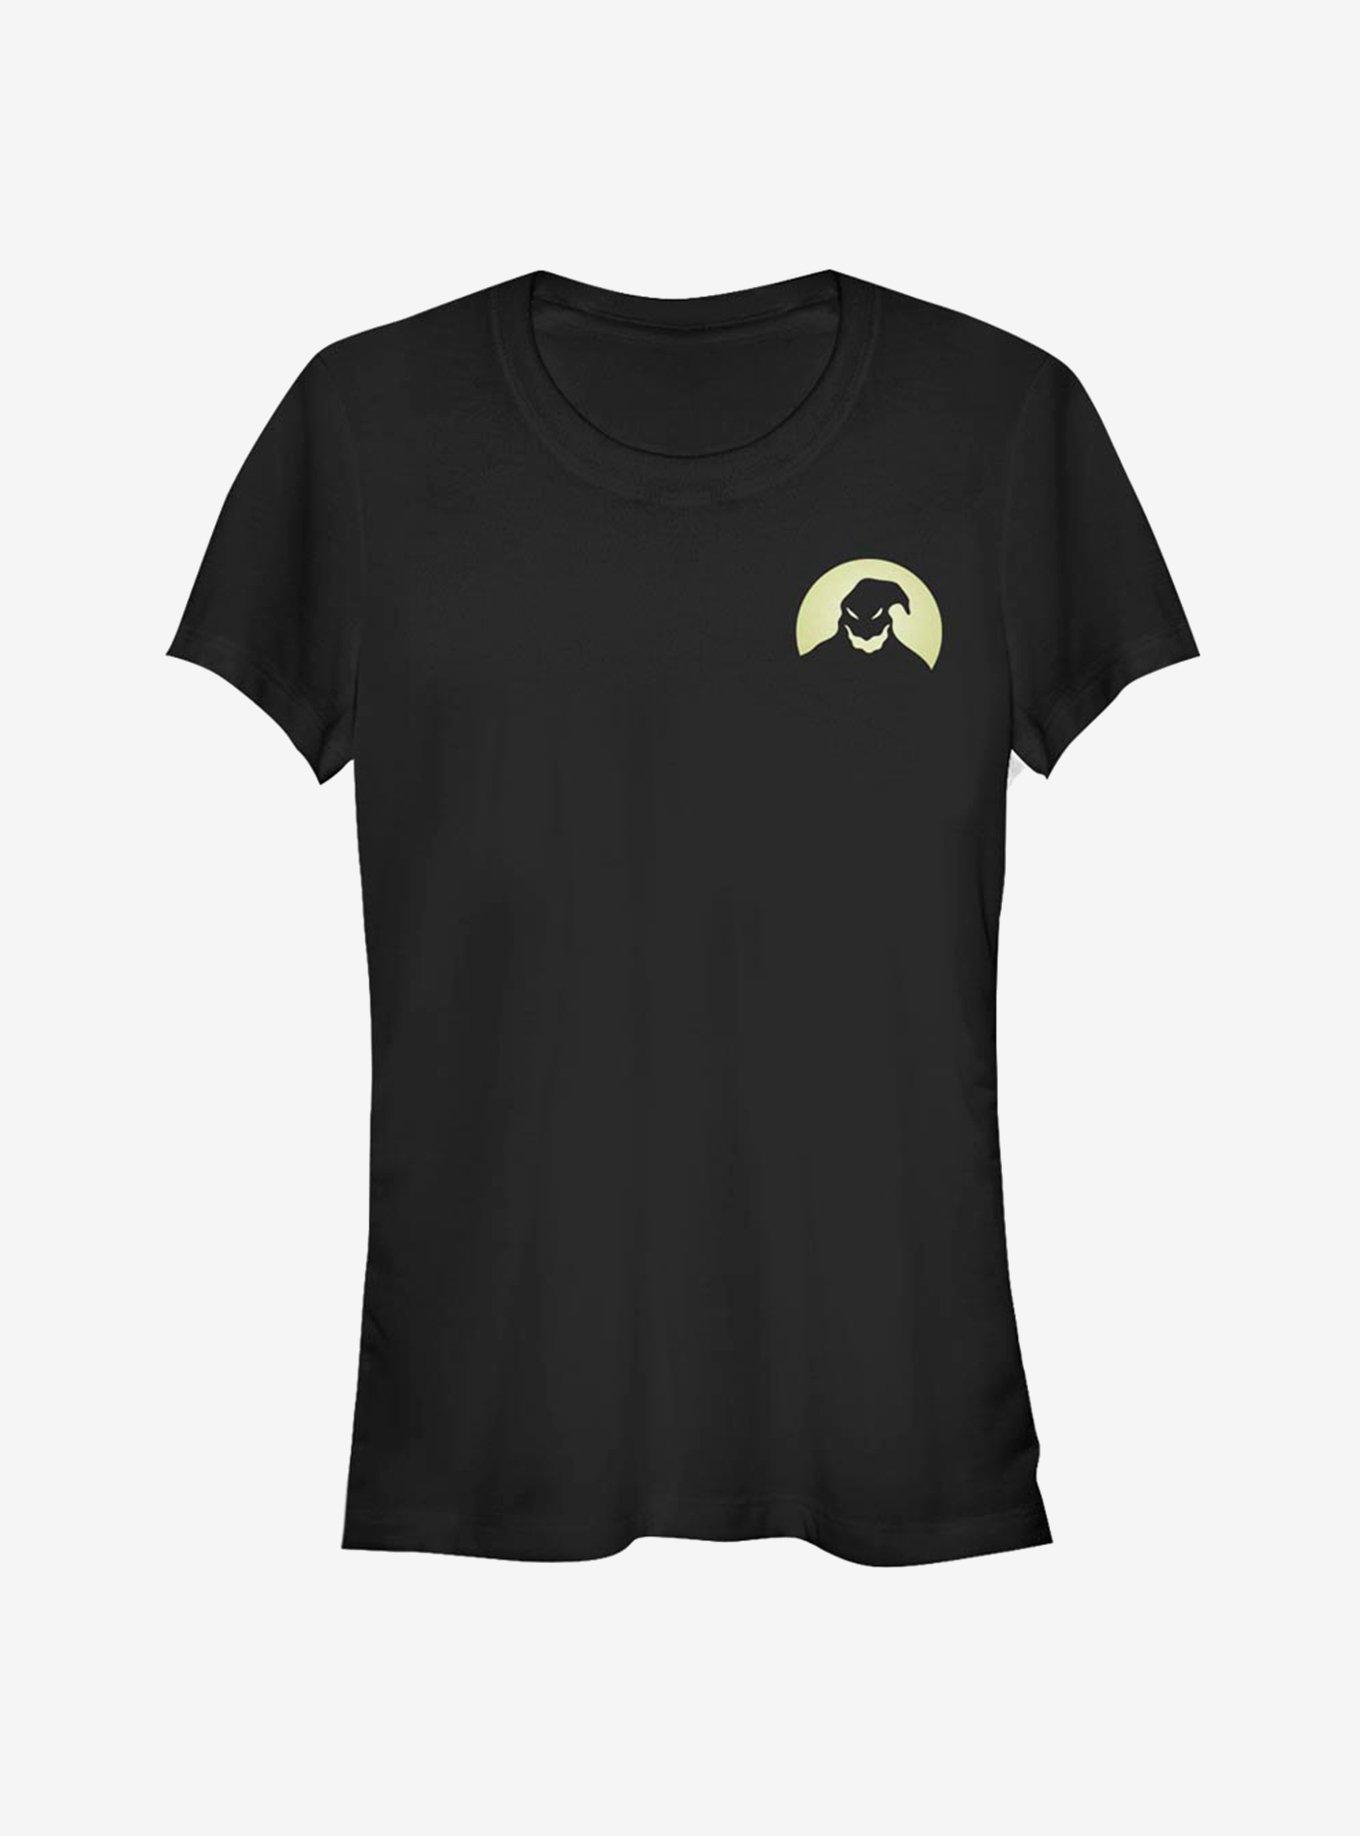 Disney The Nightmare Before Christmas Oogie Boogie Pocket Classic Girls T-Shirt, BLACK, hi-res